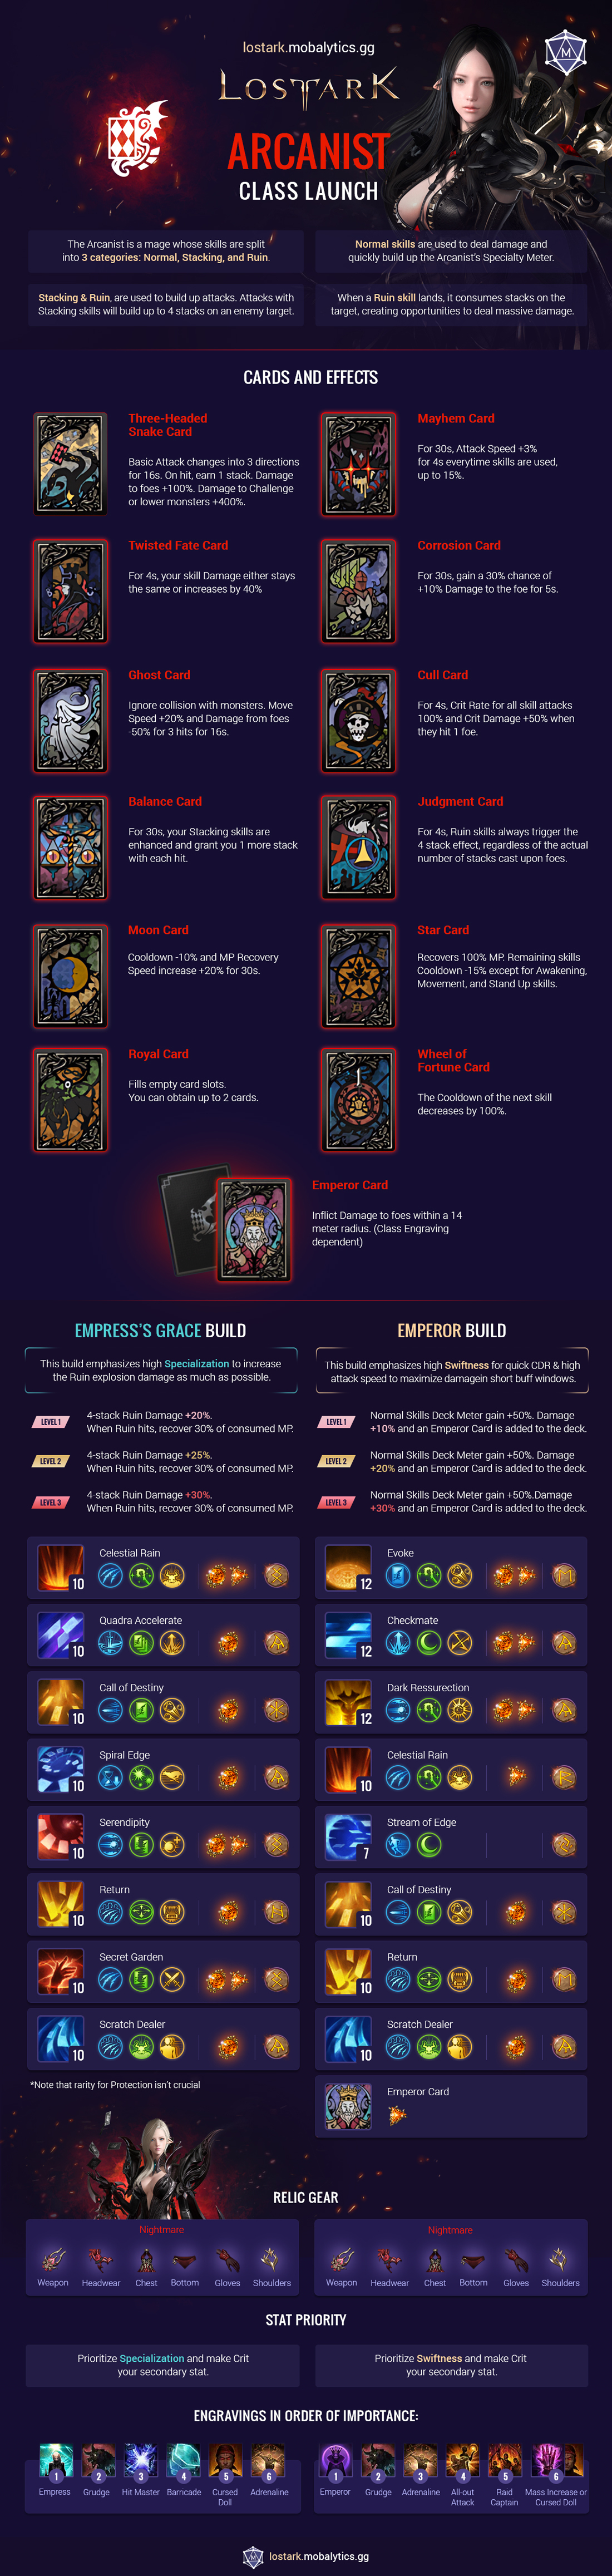 Lost Ark Arcanist Guide Infographic